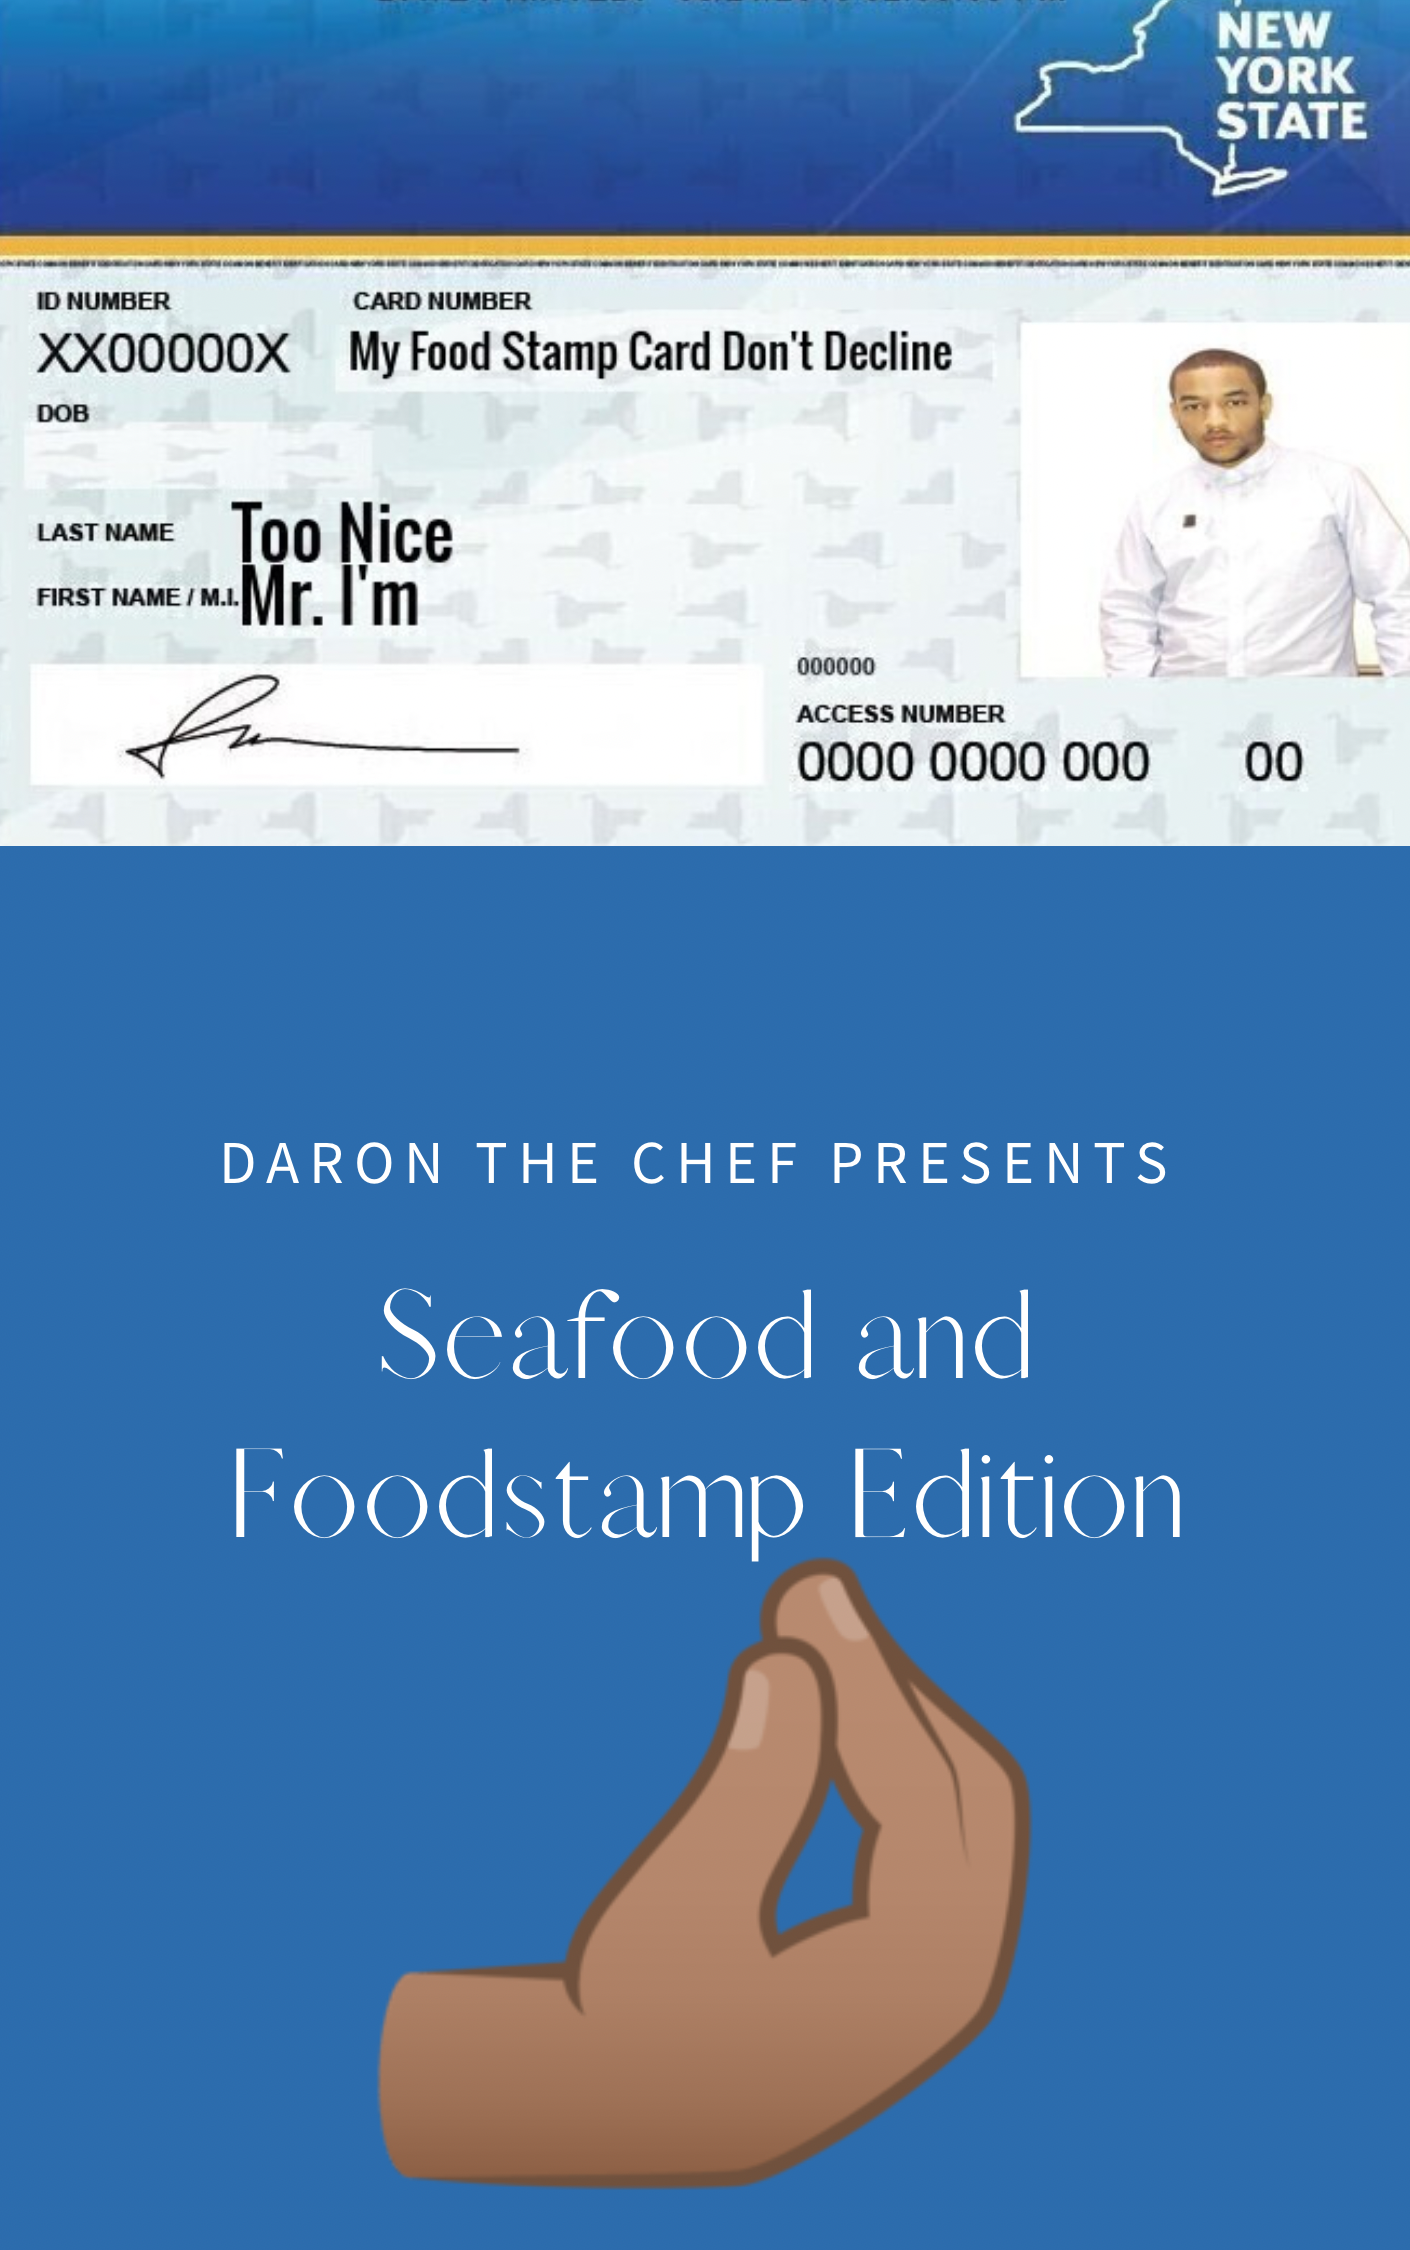 I'm Too Nice E-Book: Seafood and Foodstamp Edition